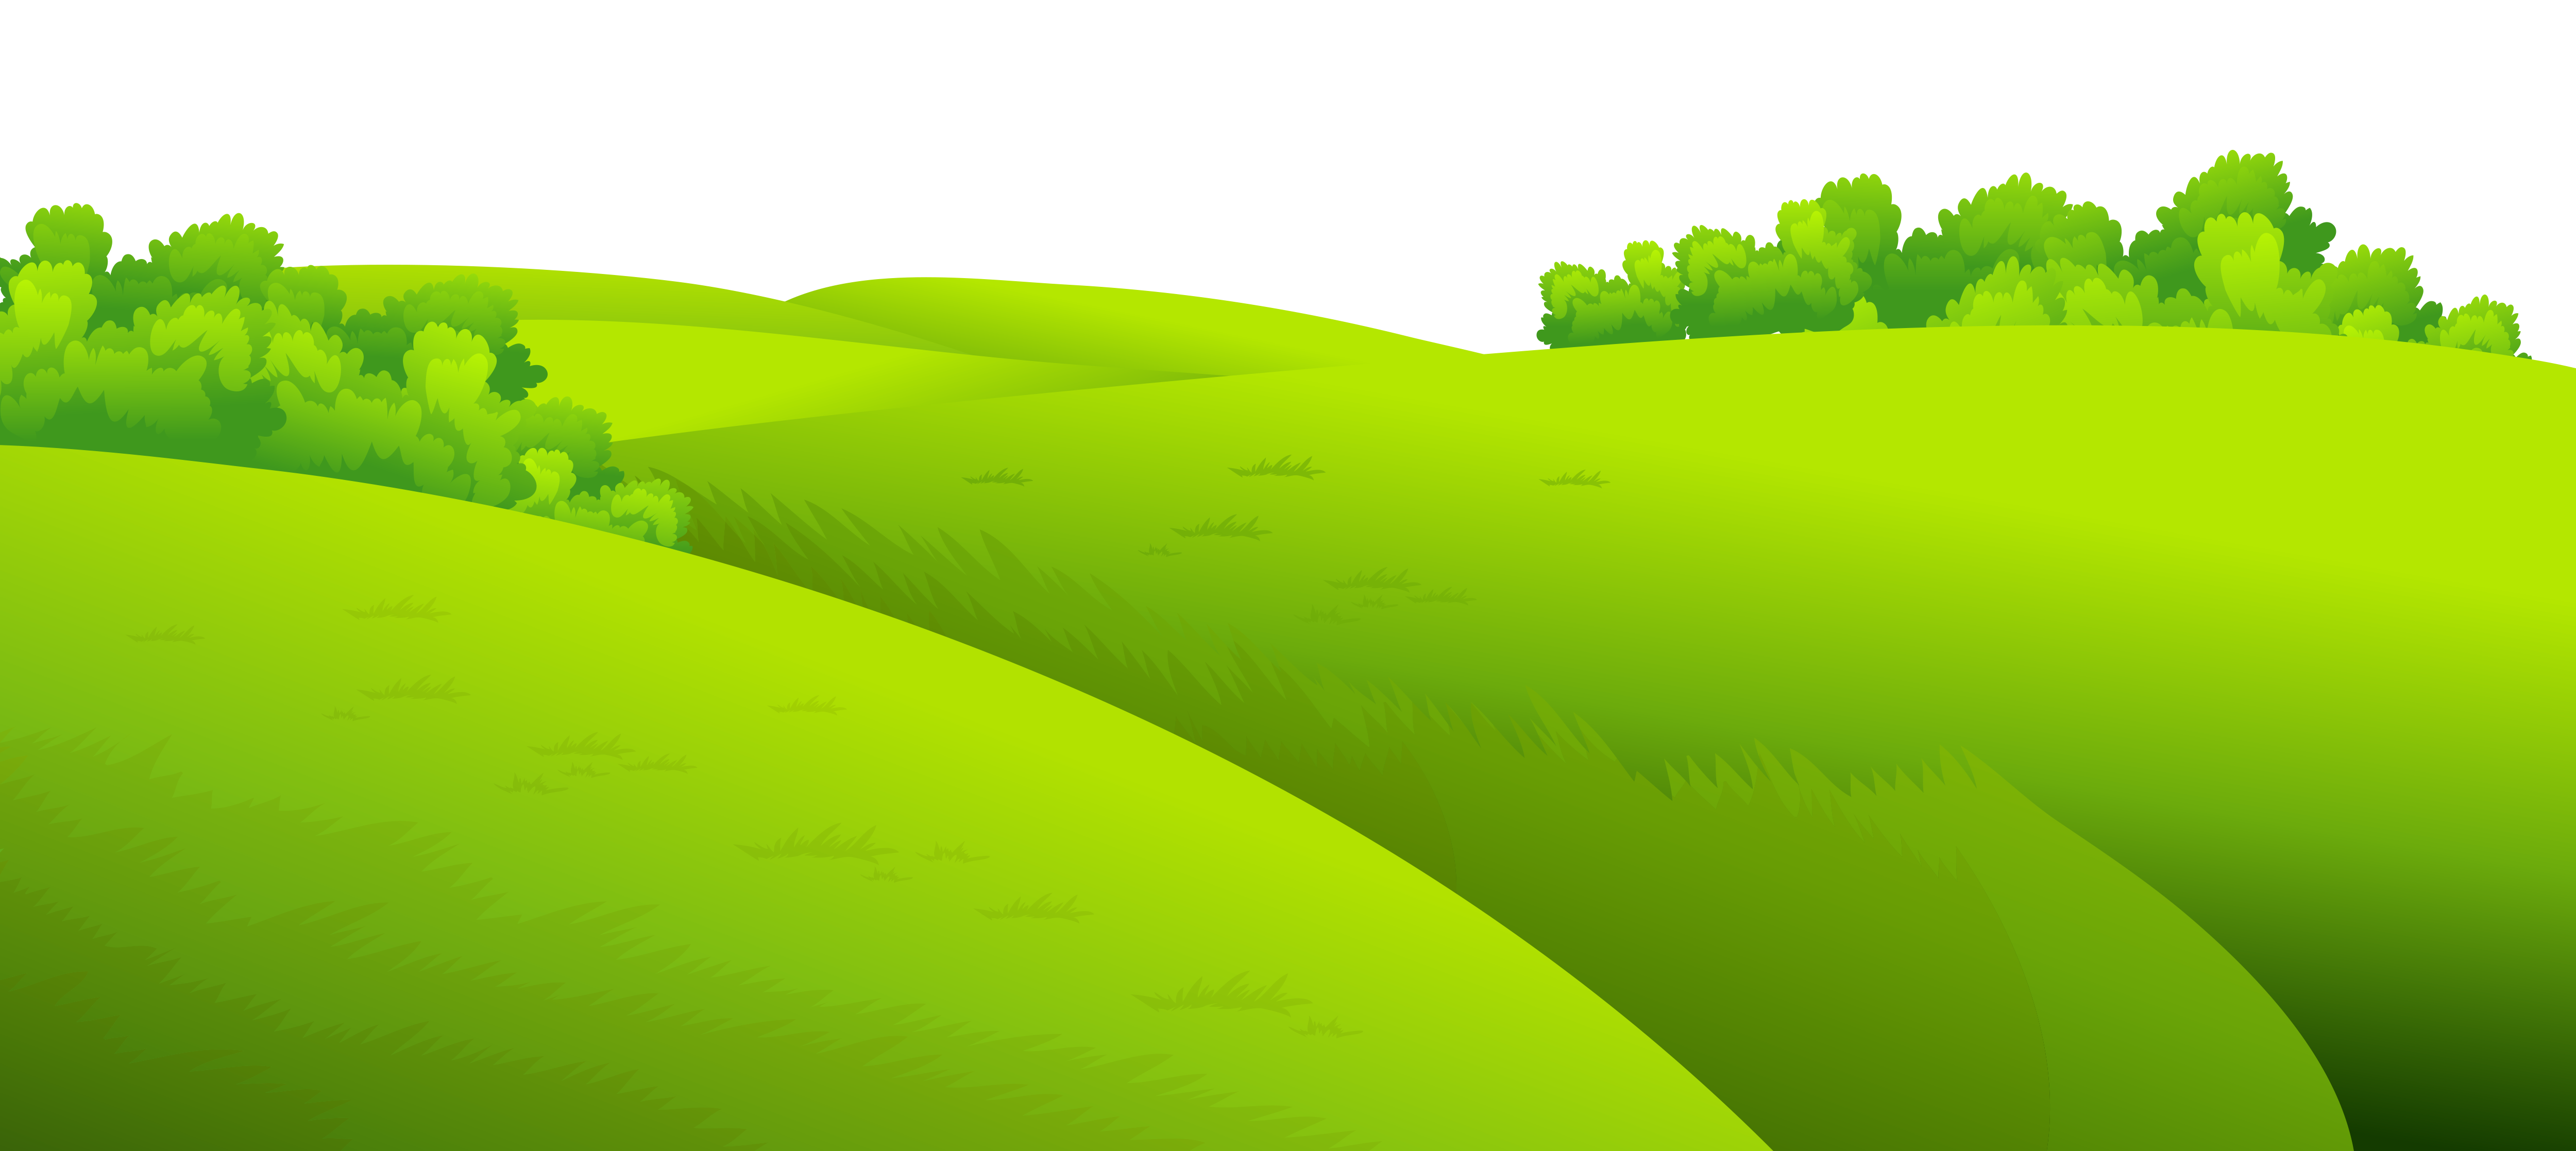 png clipart grass - photo #35